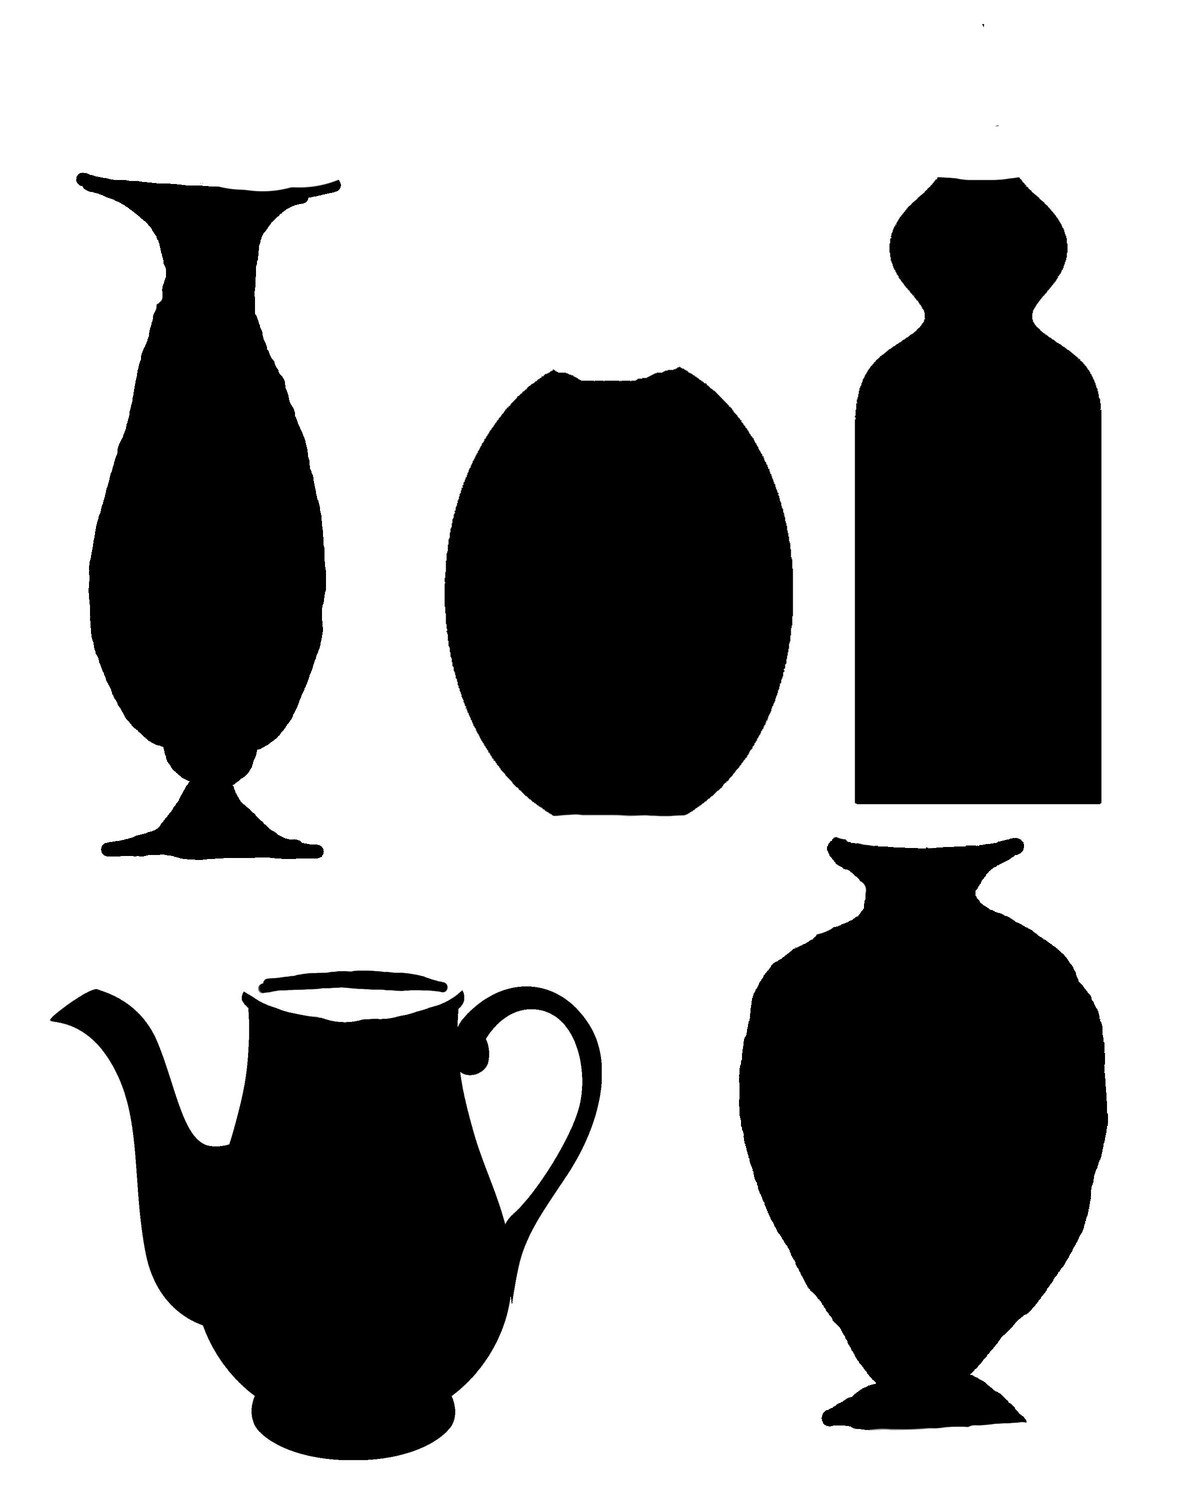 Vases 1 with masks stencil 8x10